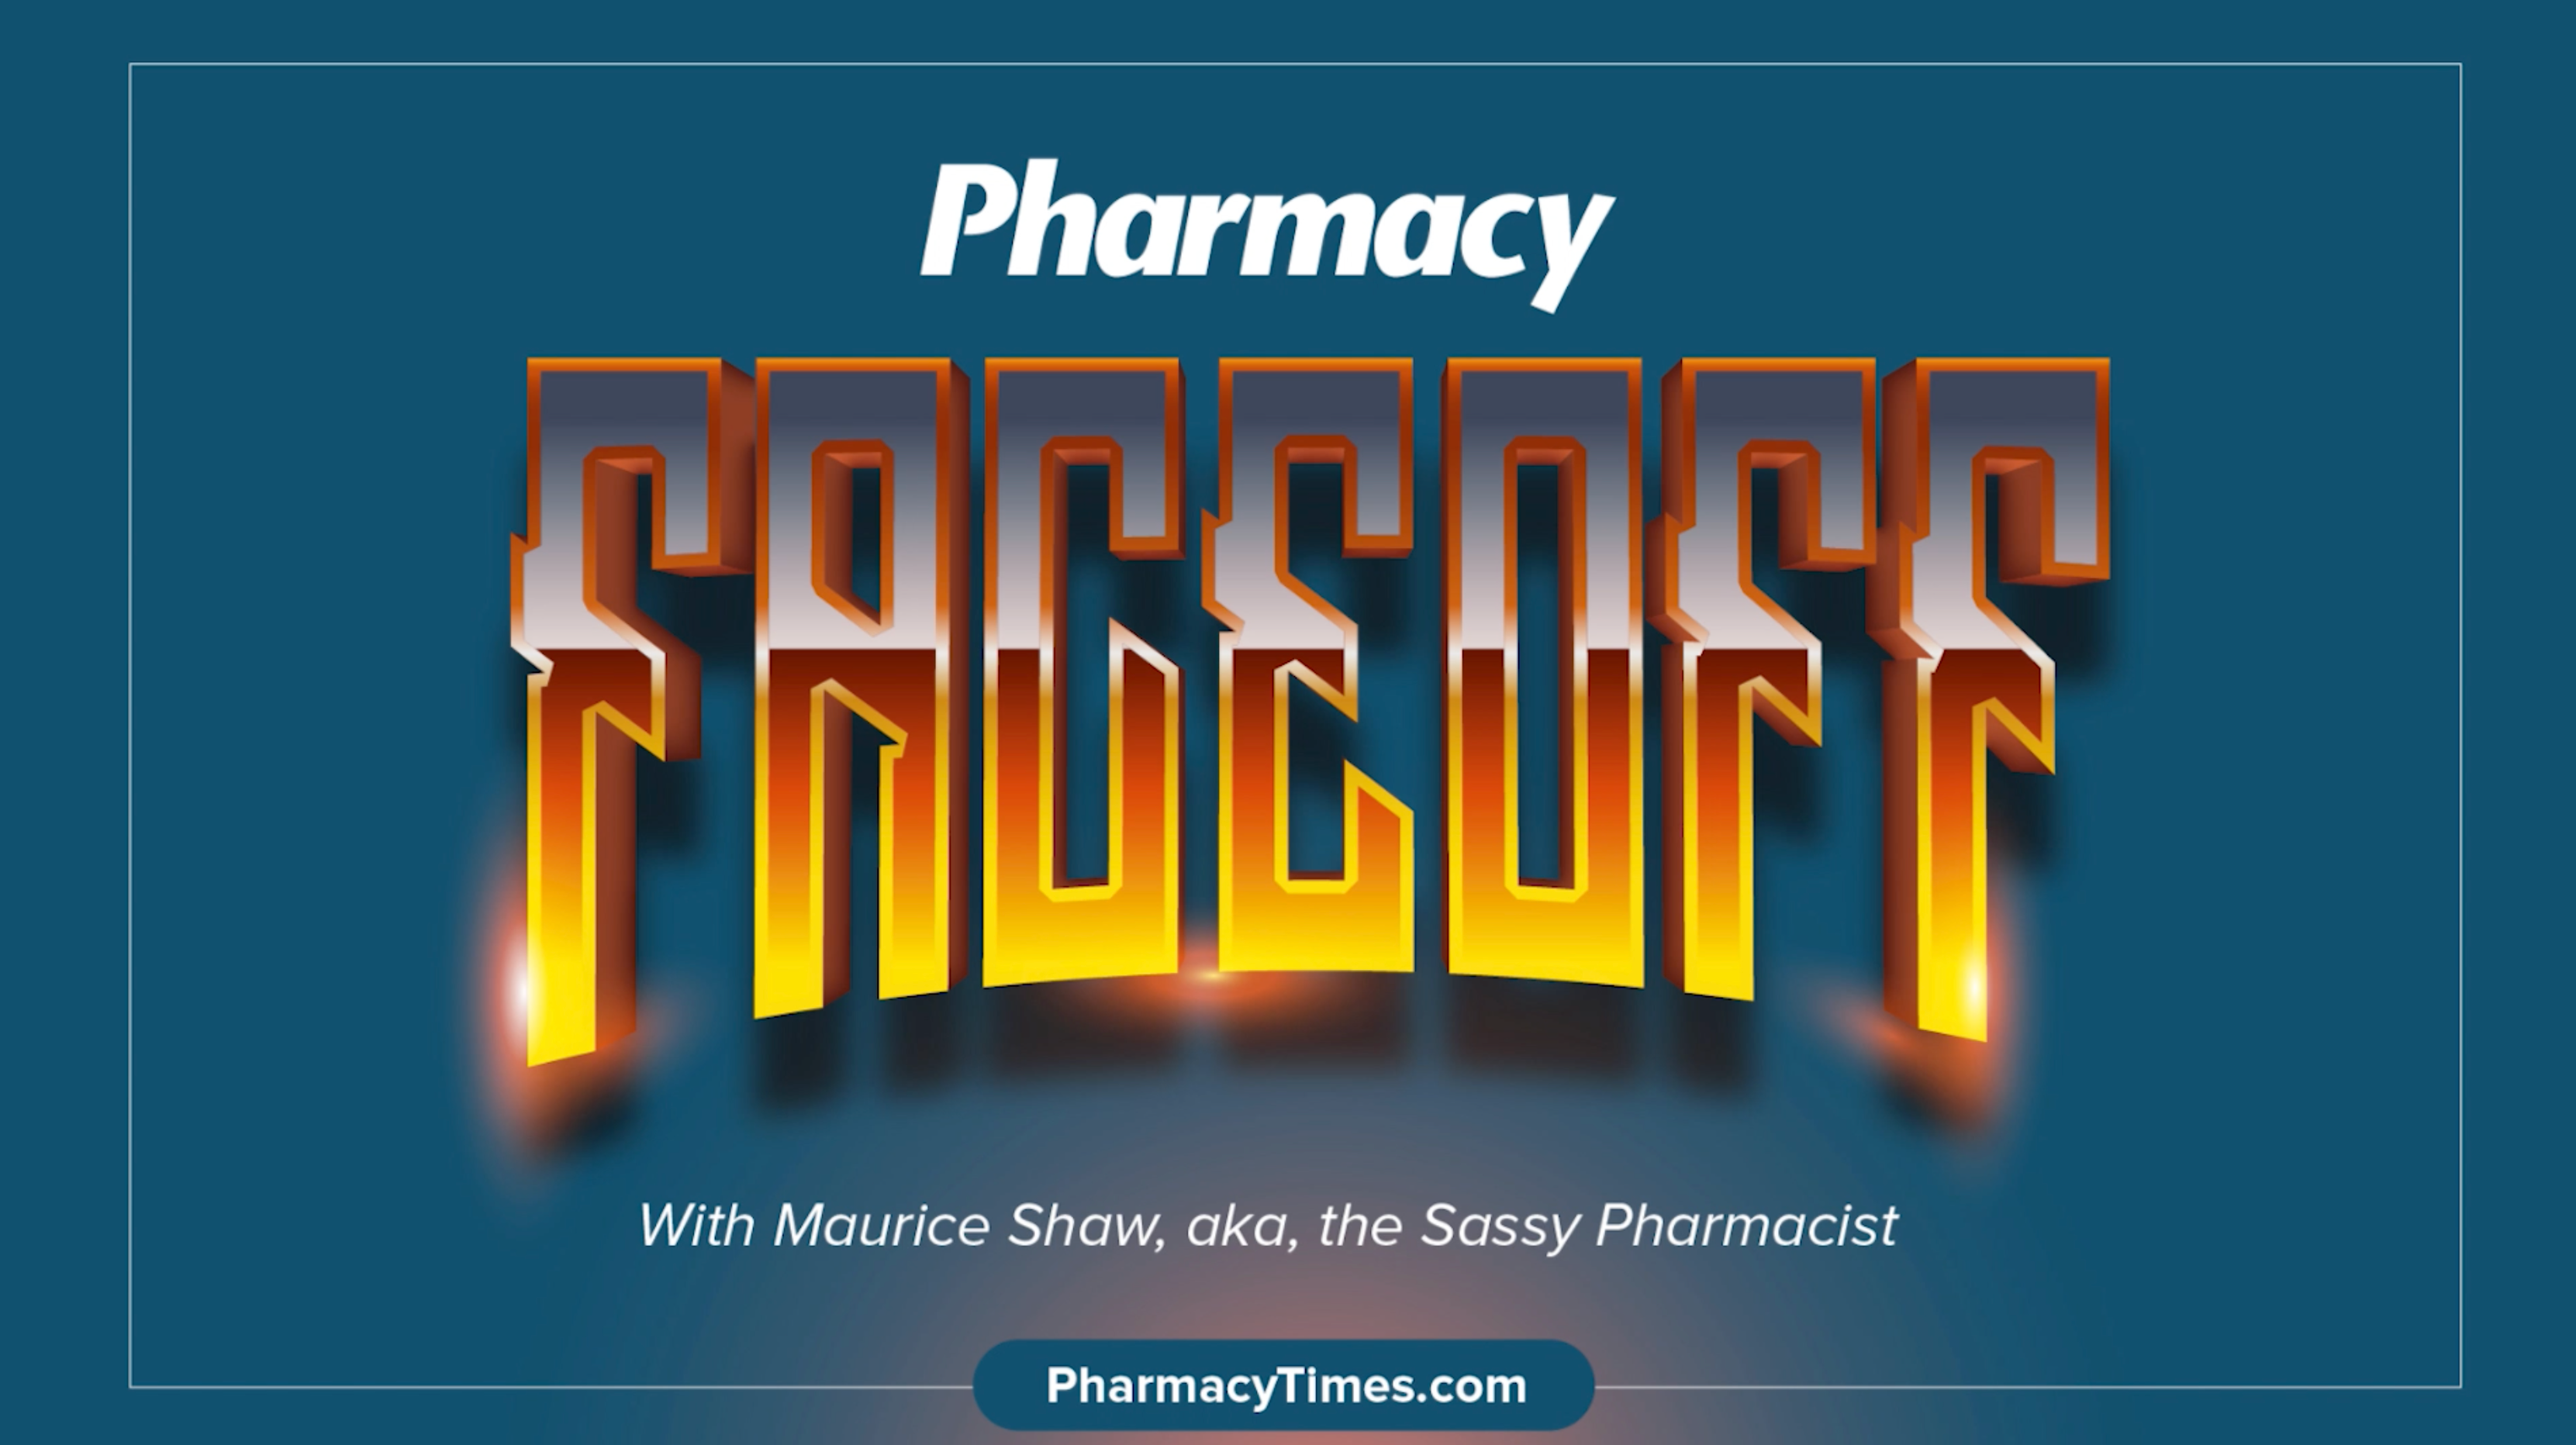 Pharmacy Students Tackle Clinical Questions in Round 2 of Pharmacy Times® Pharmacy Face-Off Gameshow